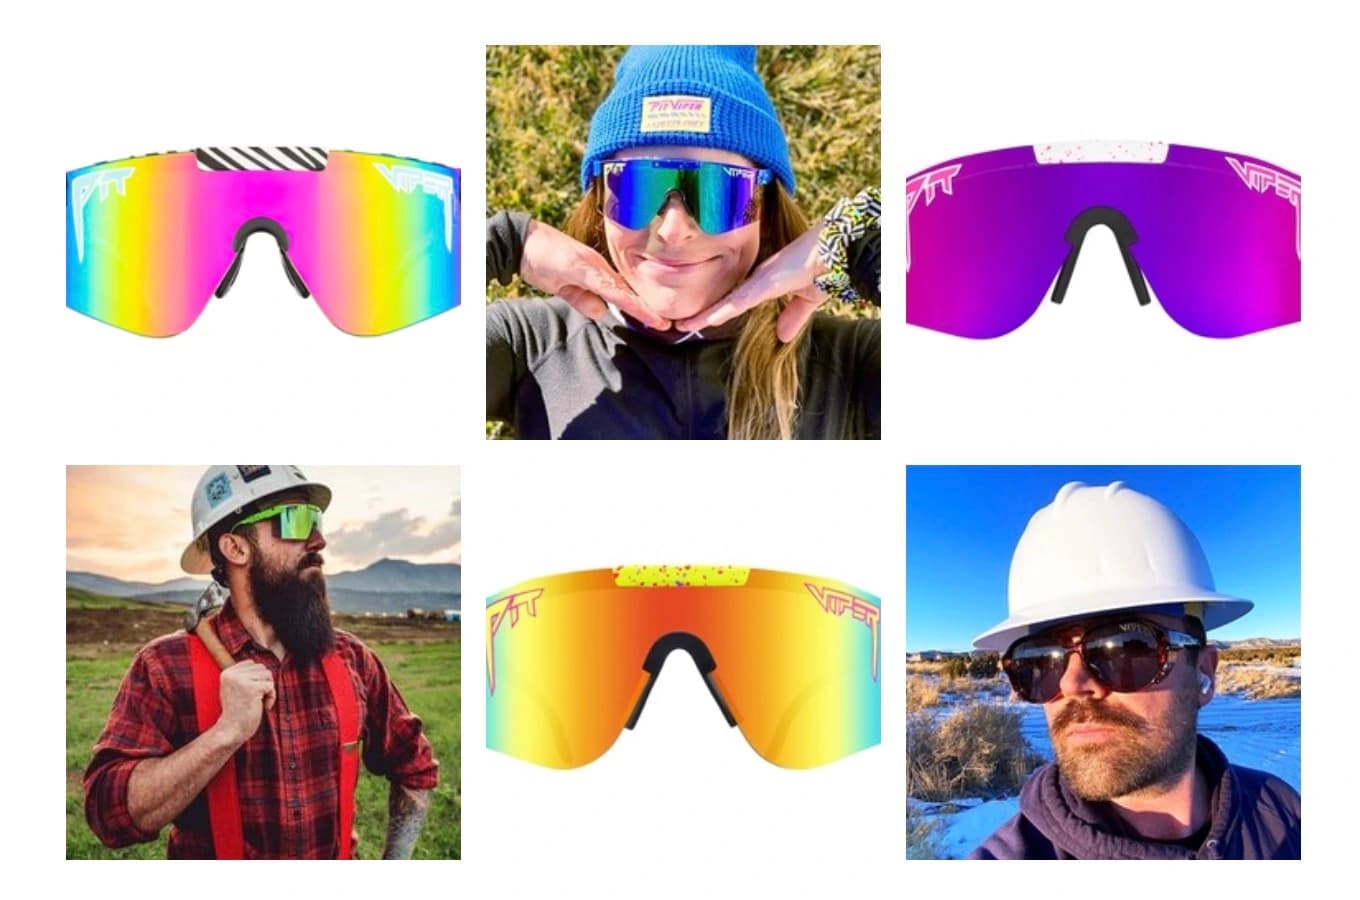 Top 3 Functional and Fashional Pit Viper Shades